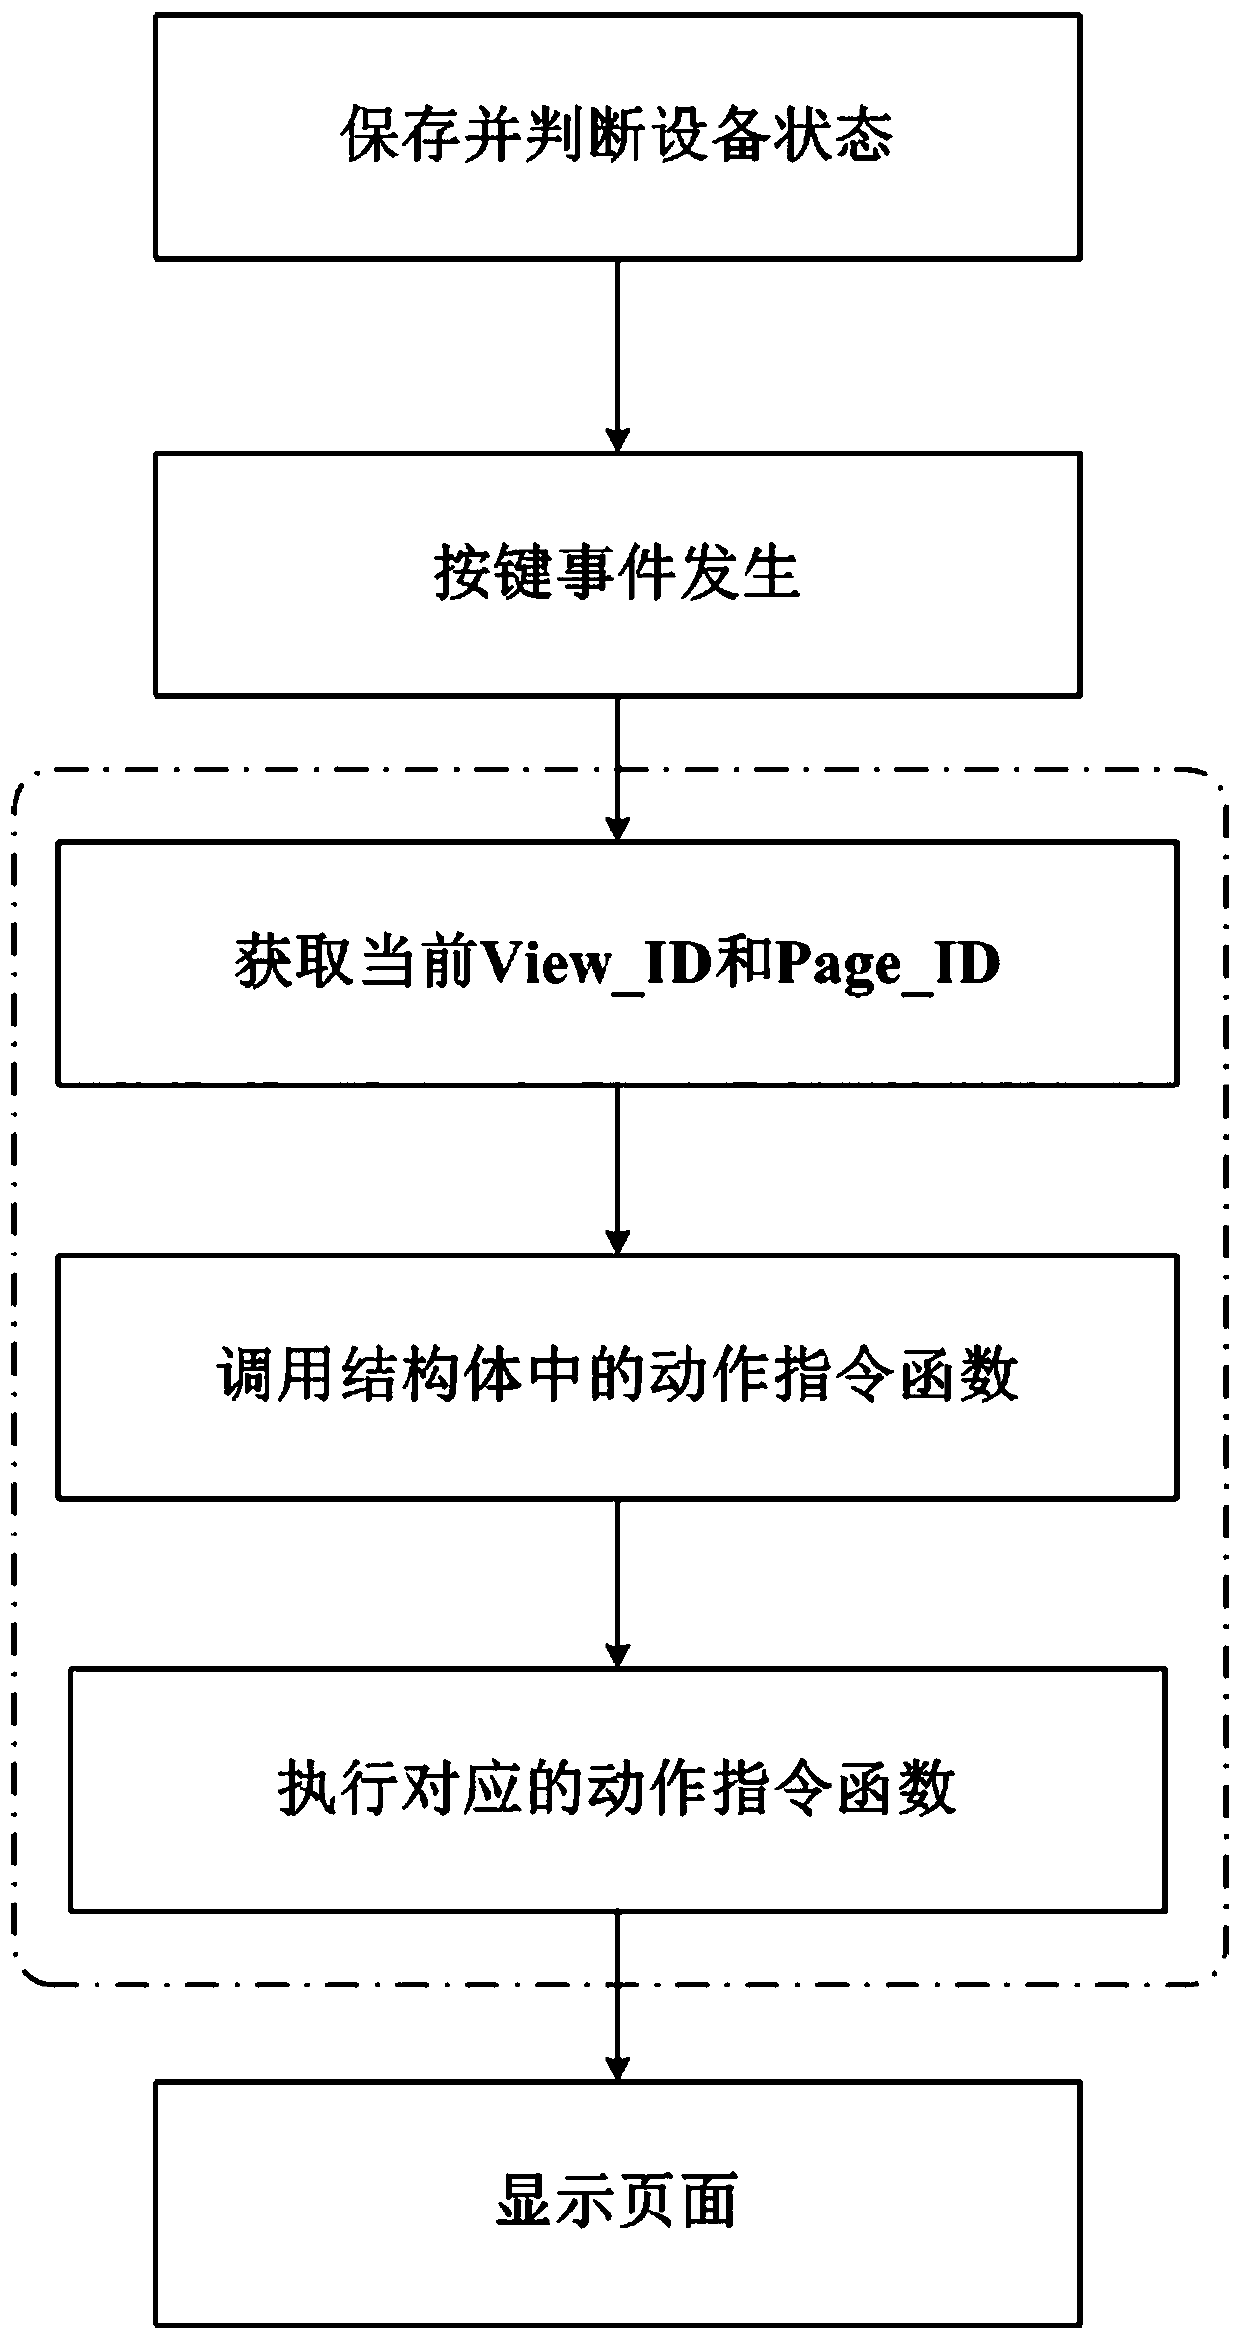 Smart wearable device multi-level menu page display method and smart wearable device